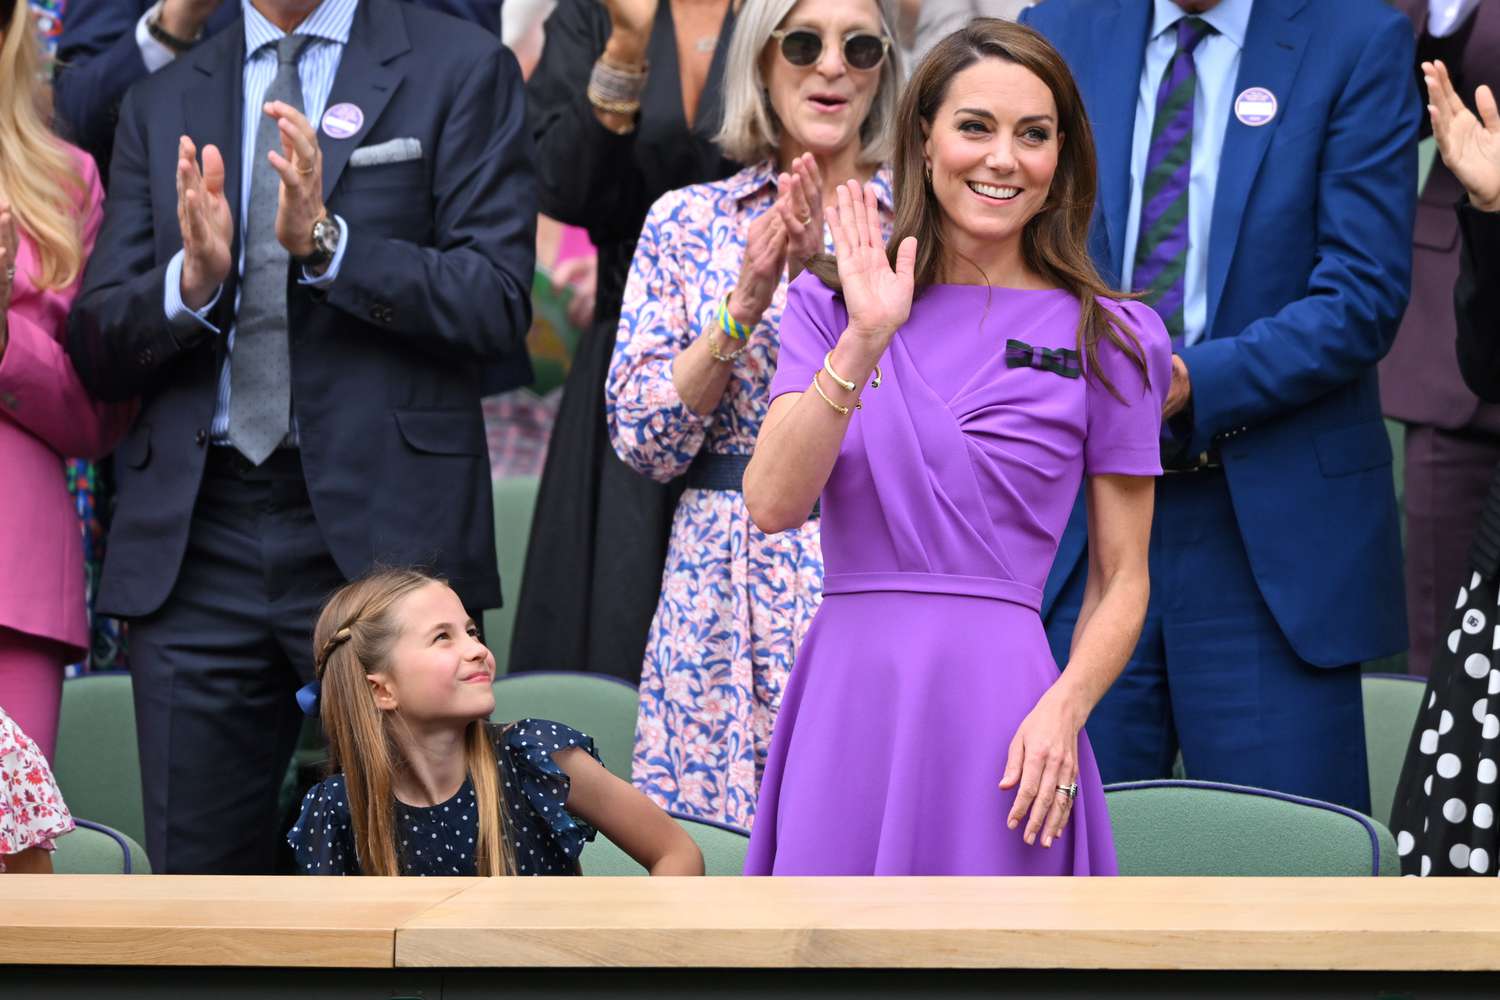 Princess Charlotte Reacts as Mom Kate Middleton Receives Standing Ovation at Wimbledon: See the Emotional Photo